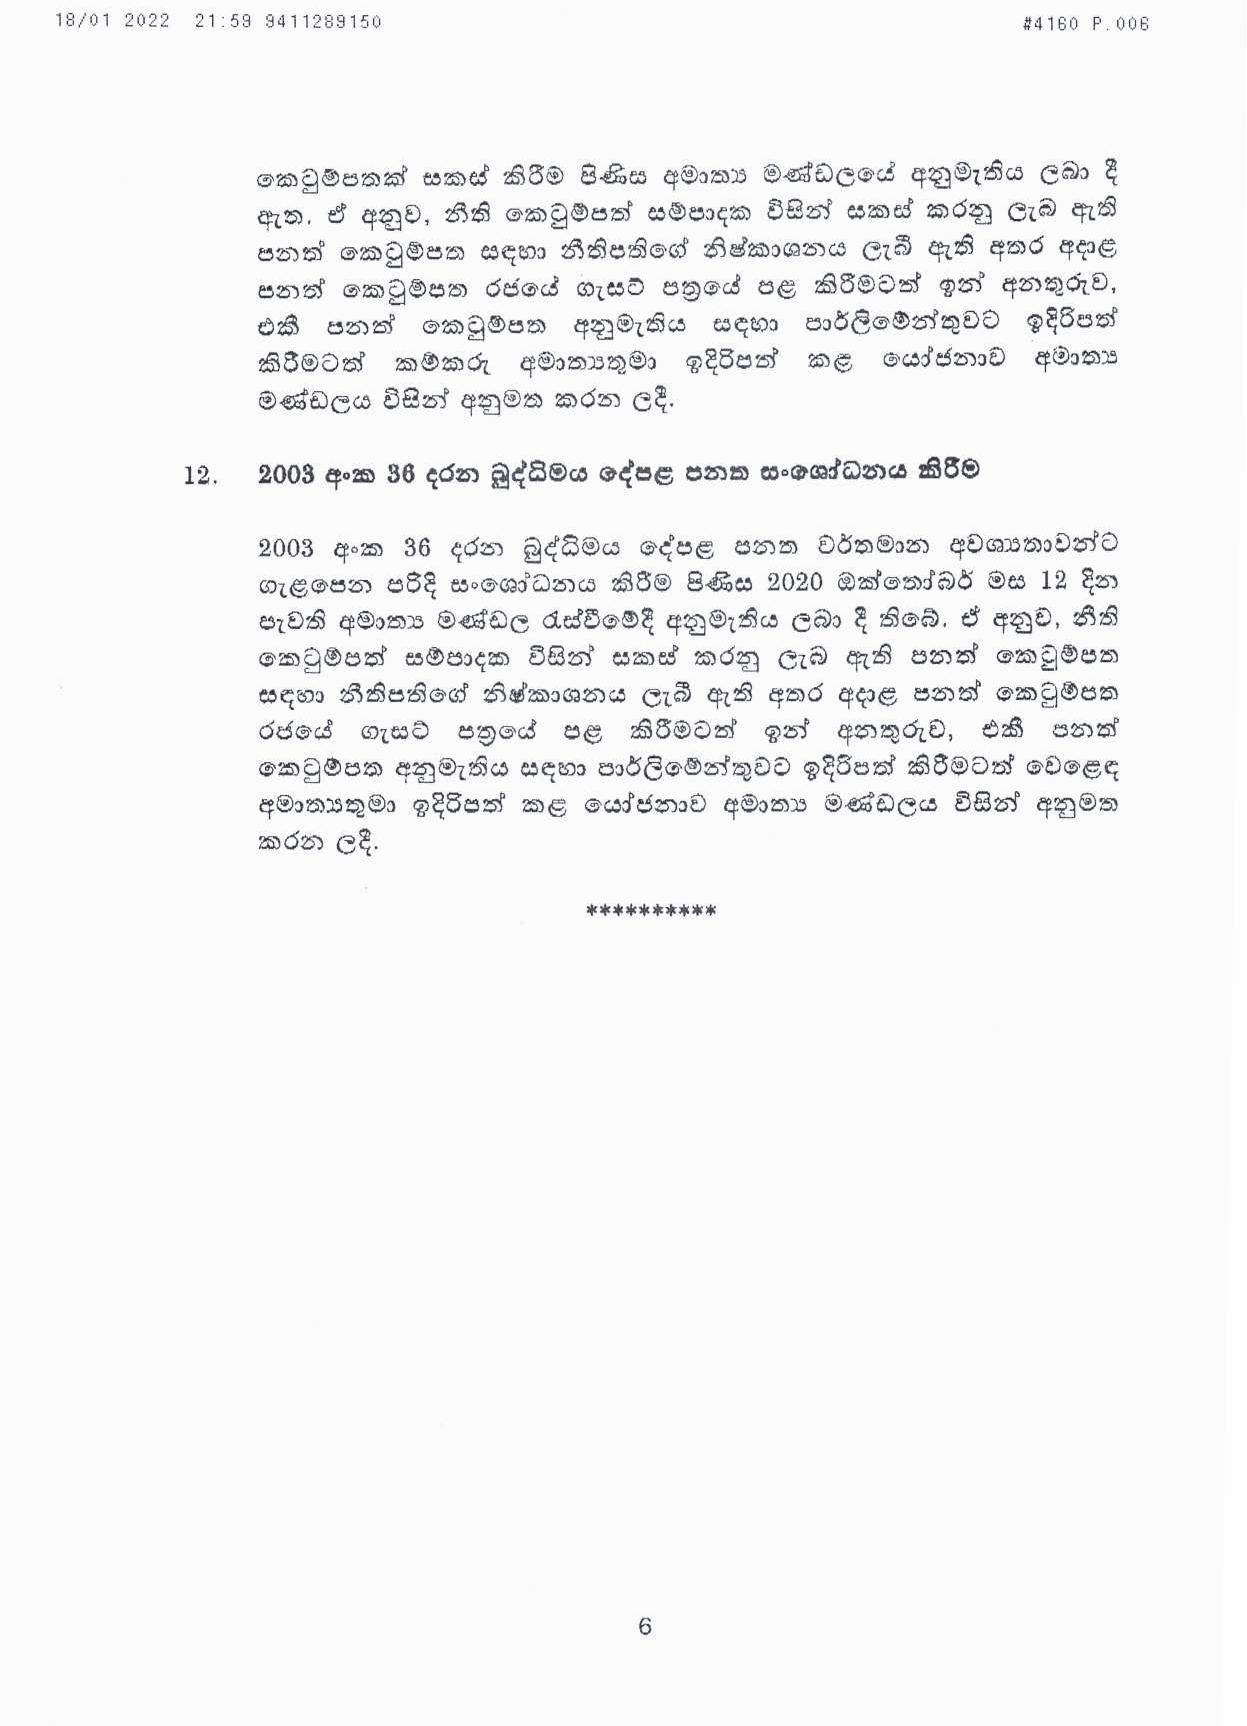 Cabinet Decision on 18.01.2022 page 006